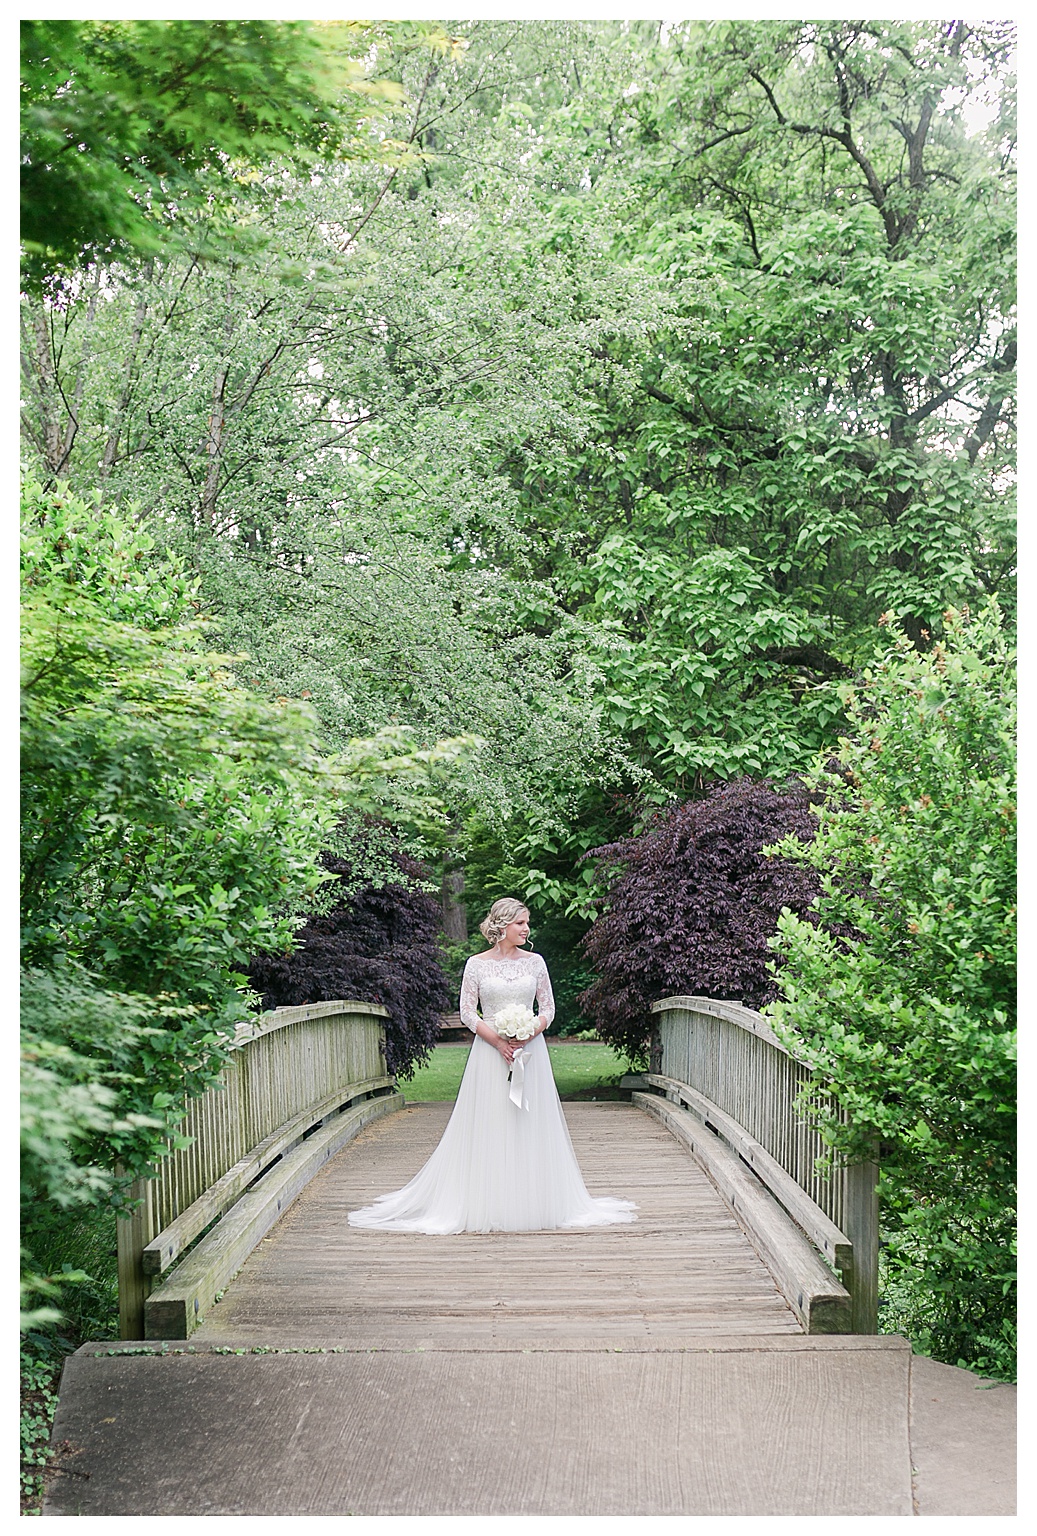 bride poses on wood bridge surrounded by green and purple foliage